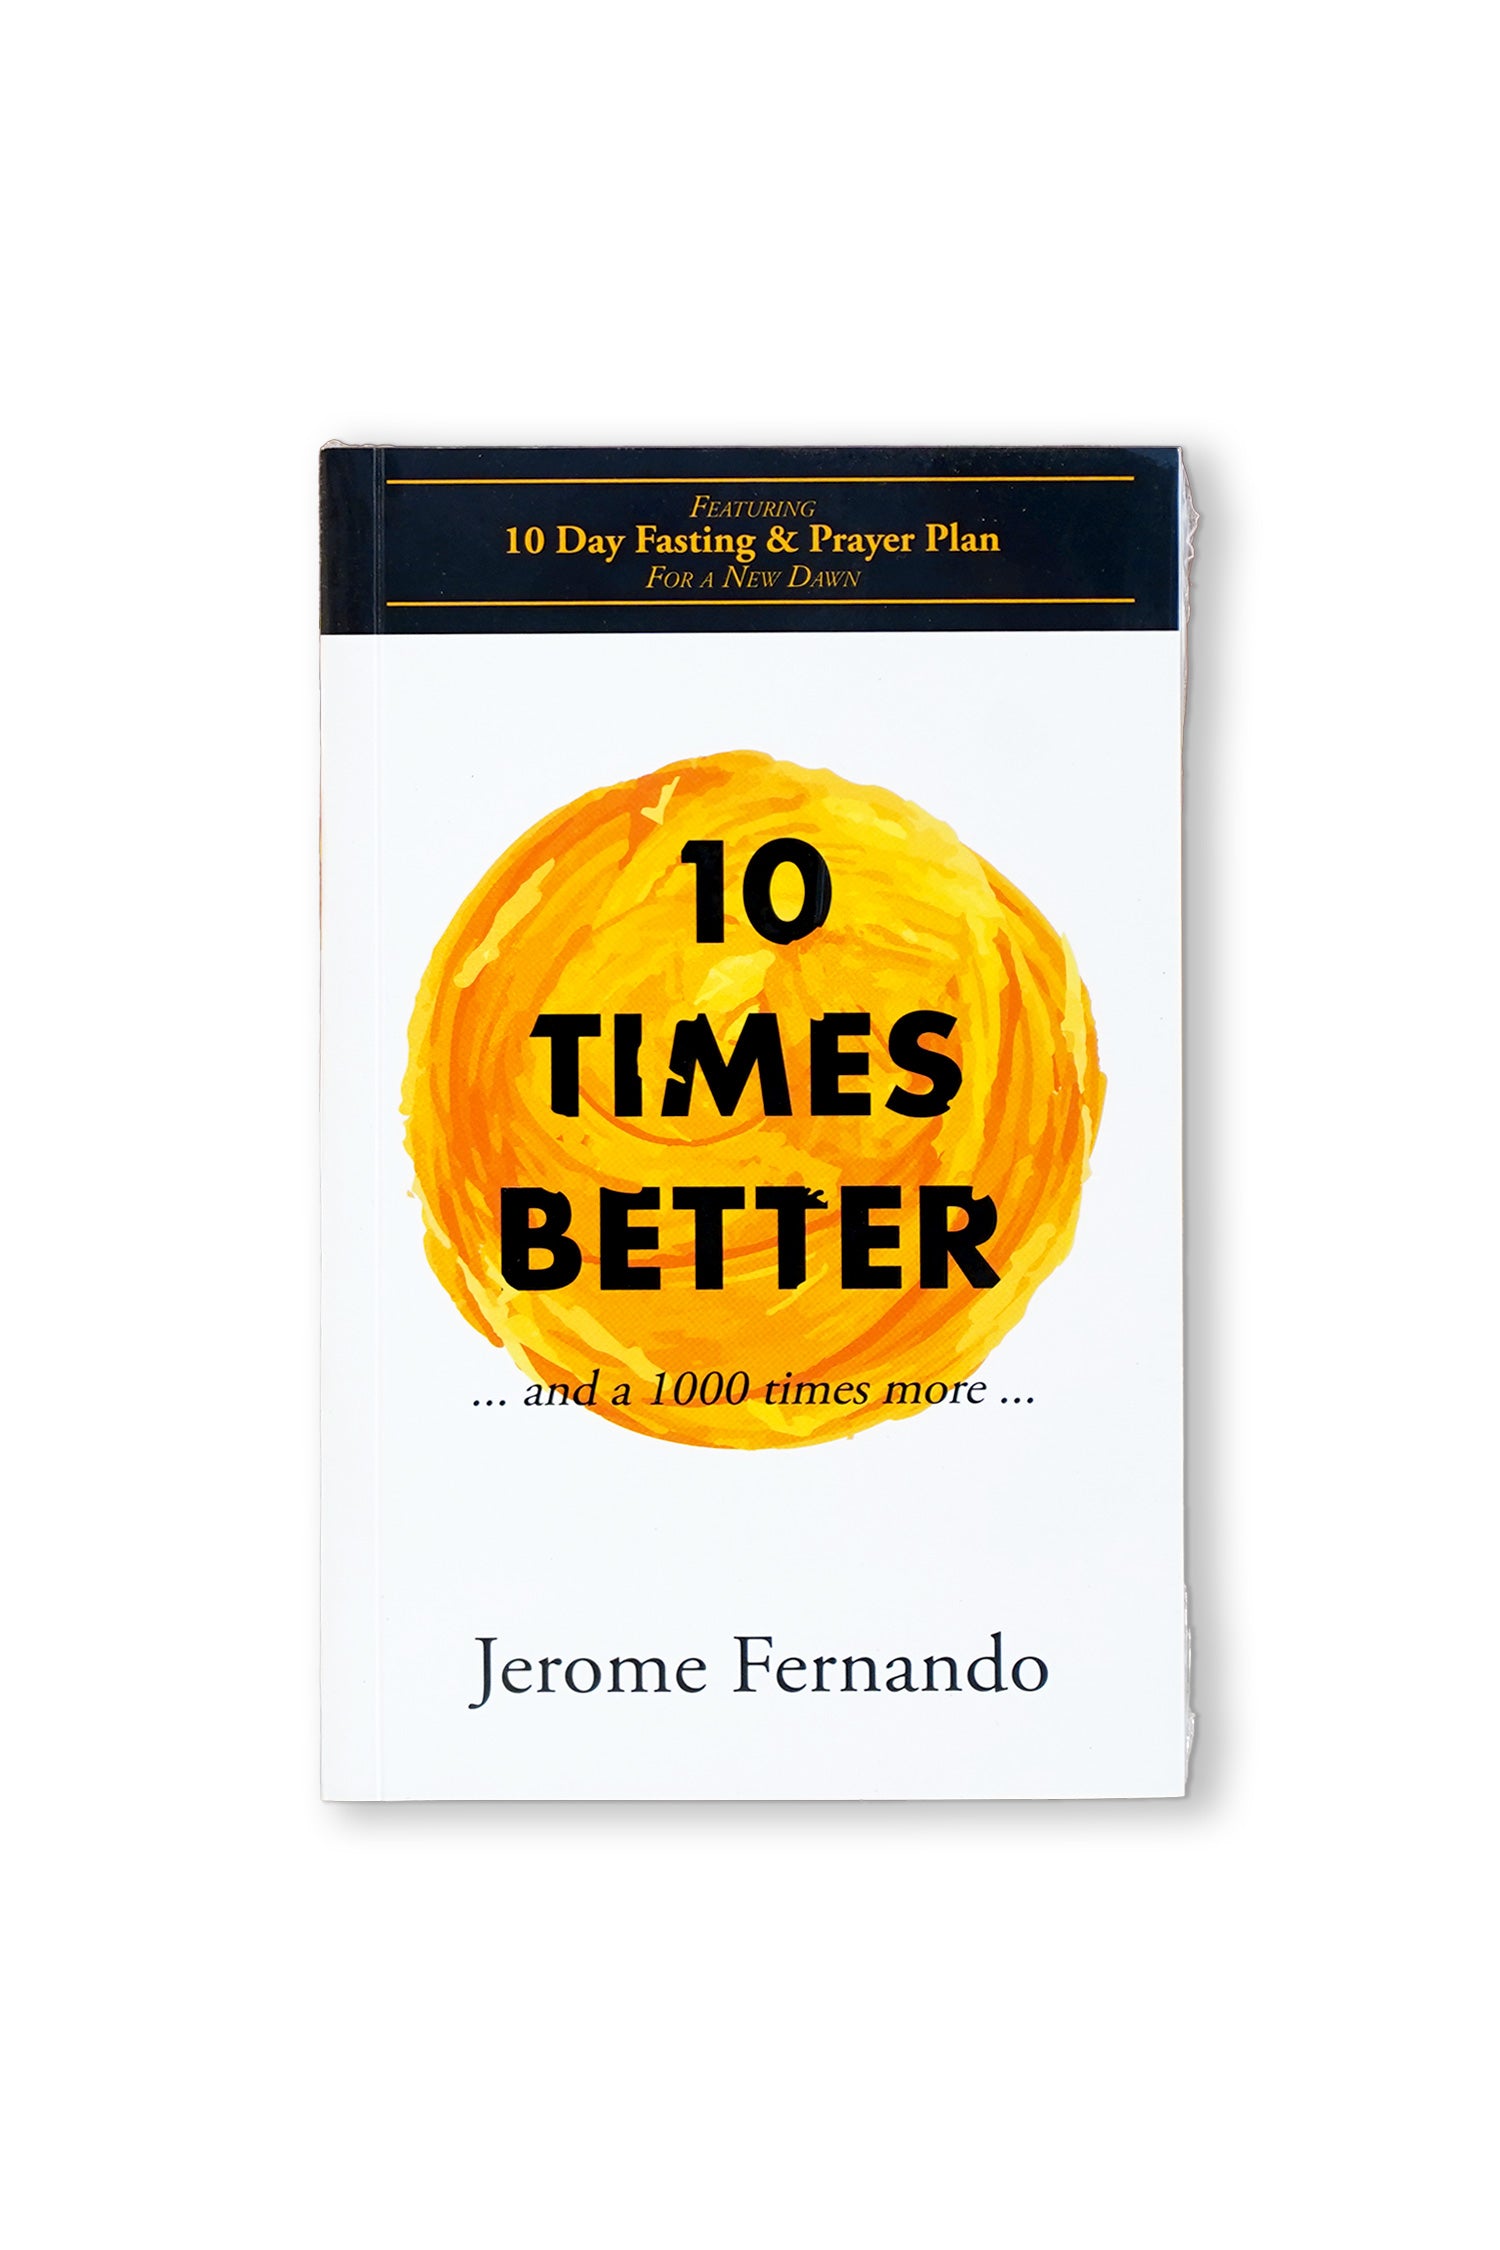 [PICK - UP] 10 Times Better and a 1000 Times More by Jerome Fernando